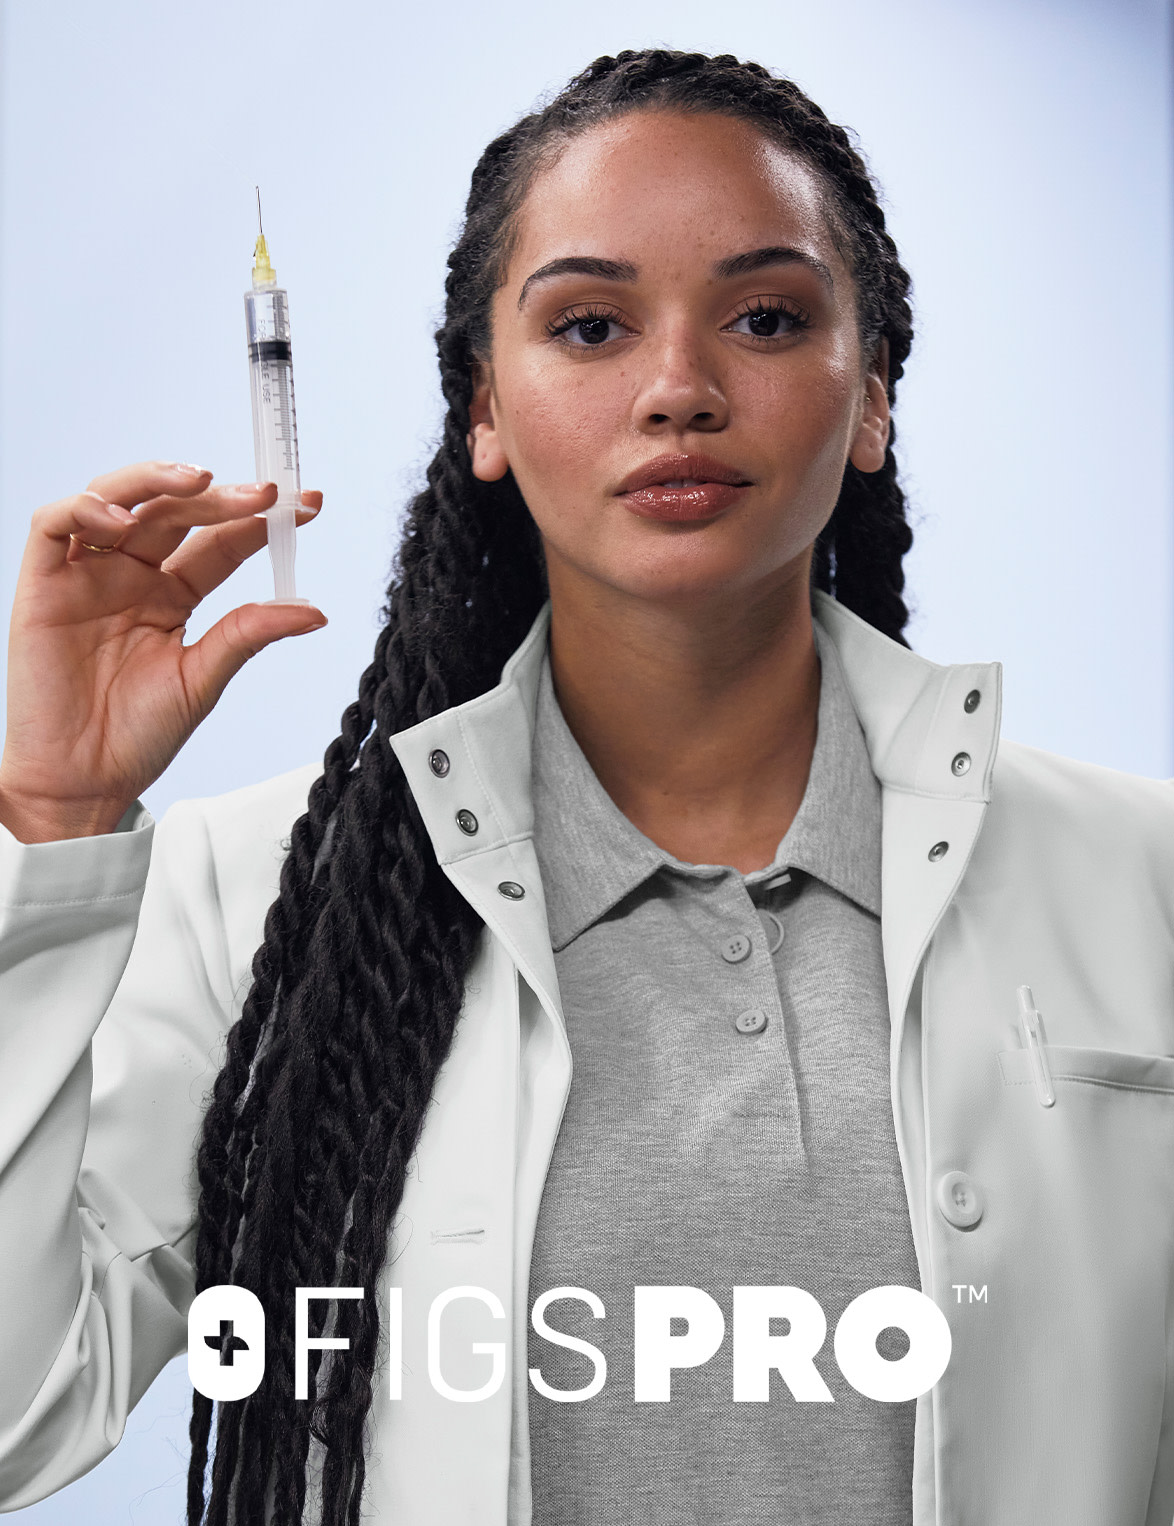 FIGSPRO™ Pique Shortsleeve Scrubpolo — Made with 100% Pima Cotton to stay comfy during telemedicine appointments.